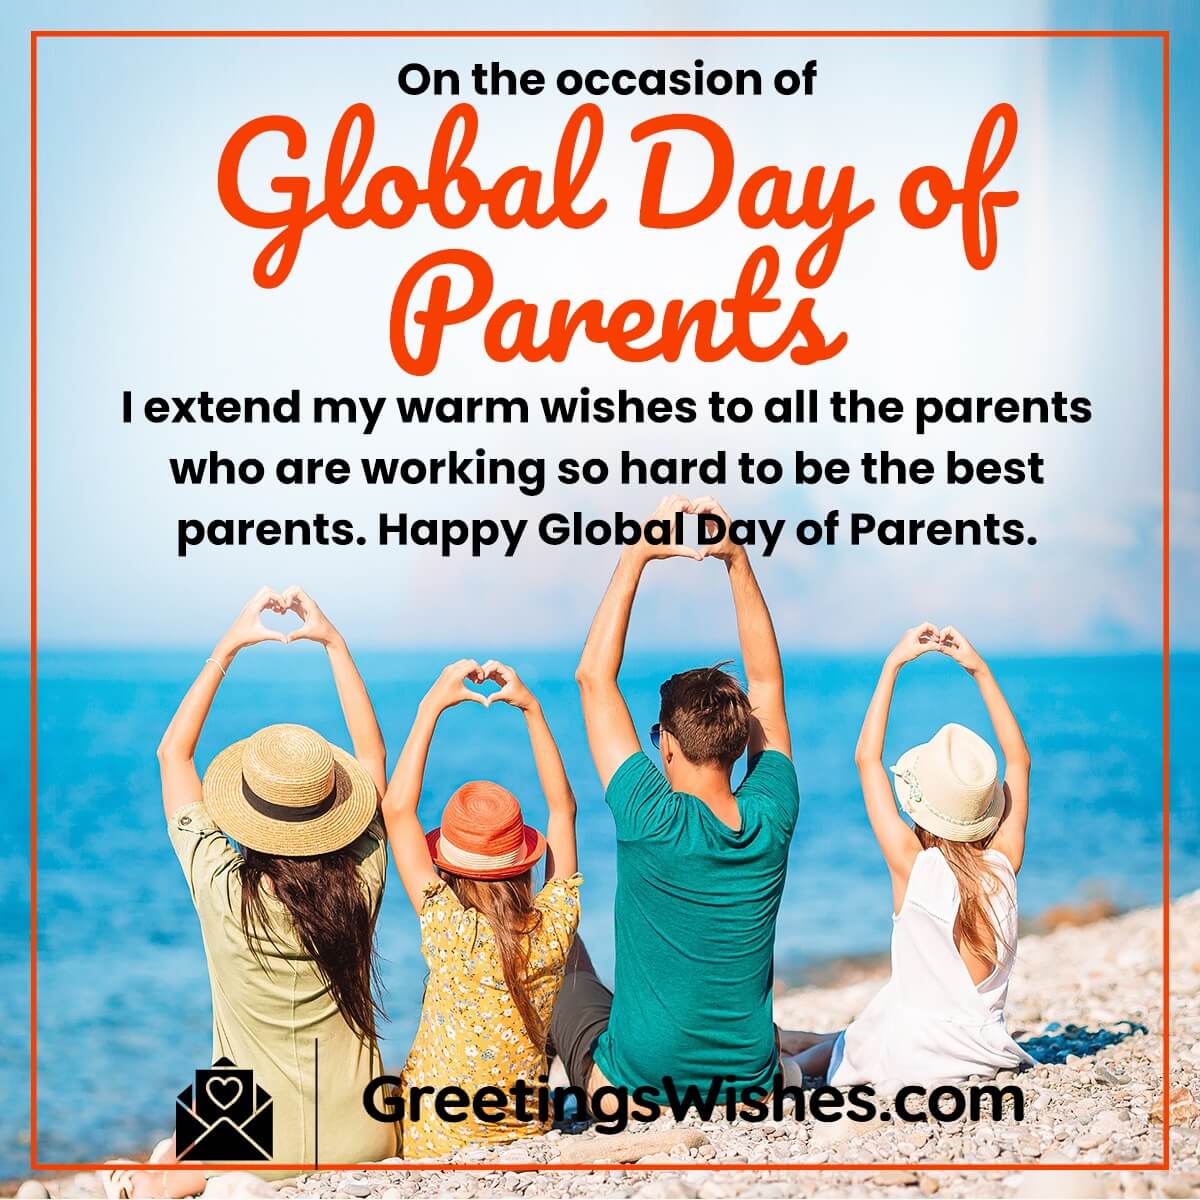 Happy Global Day Of Parents Wish Image